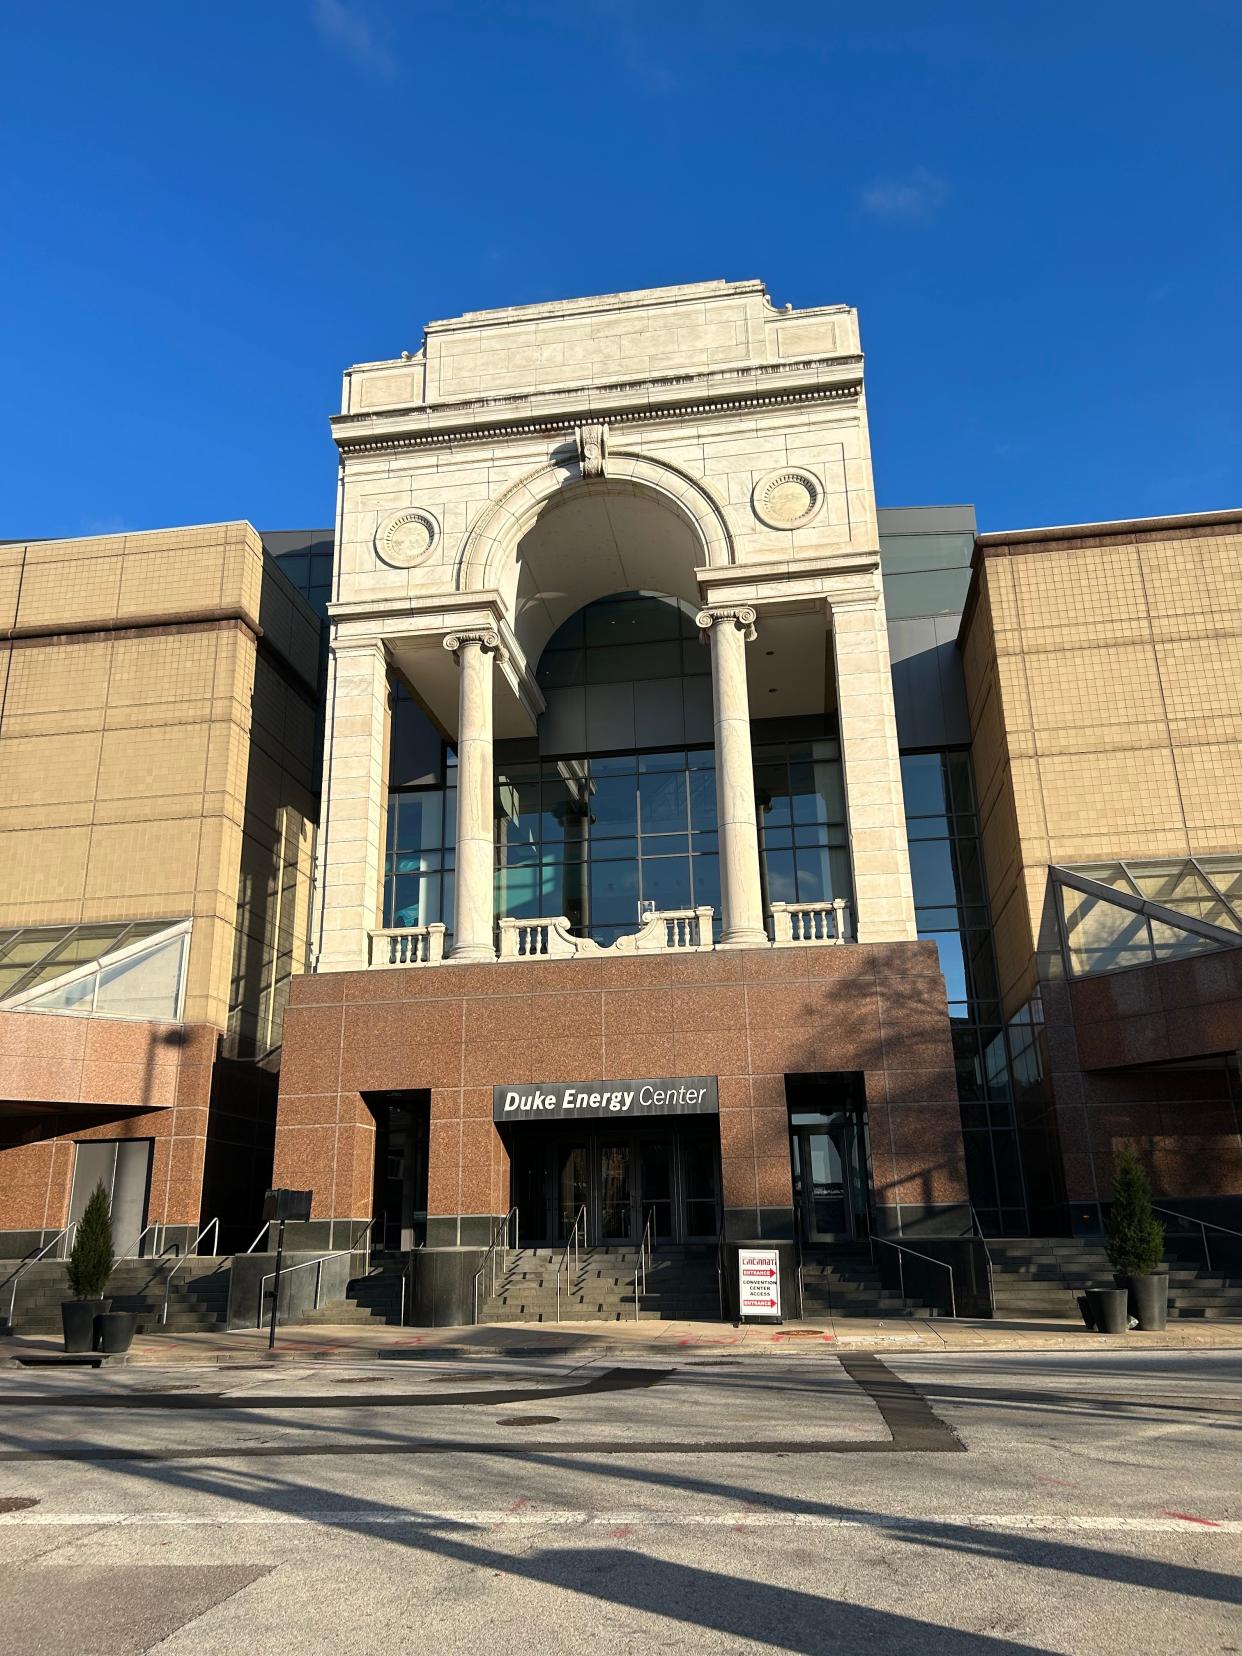 February 24, 2023: The arch from the old Albee Theater was saved and incorporated into the Duke Energy Convention Center on the Fifth Street side in downtown Cincinnati.